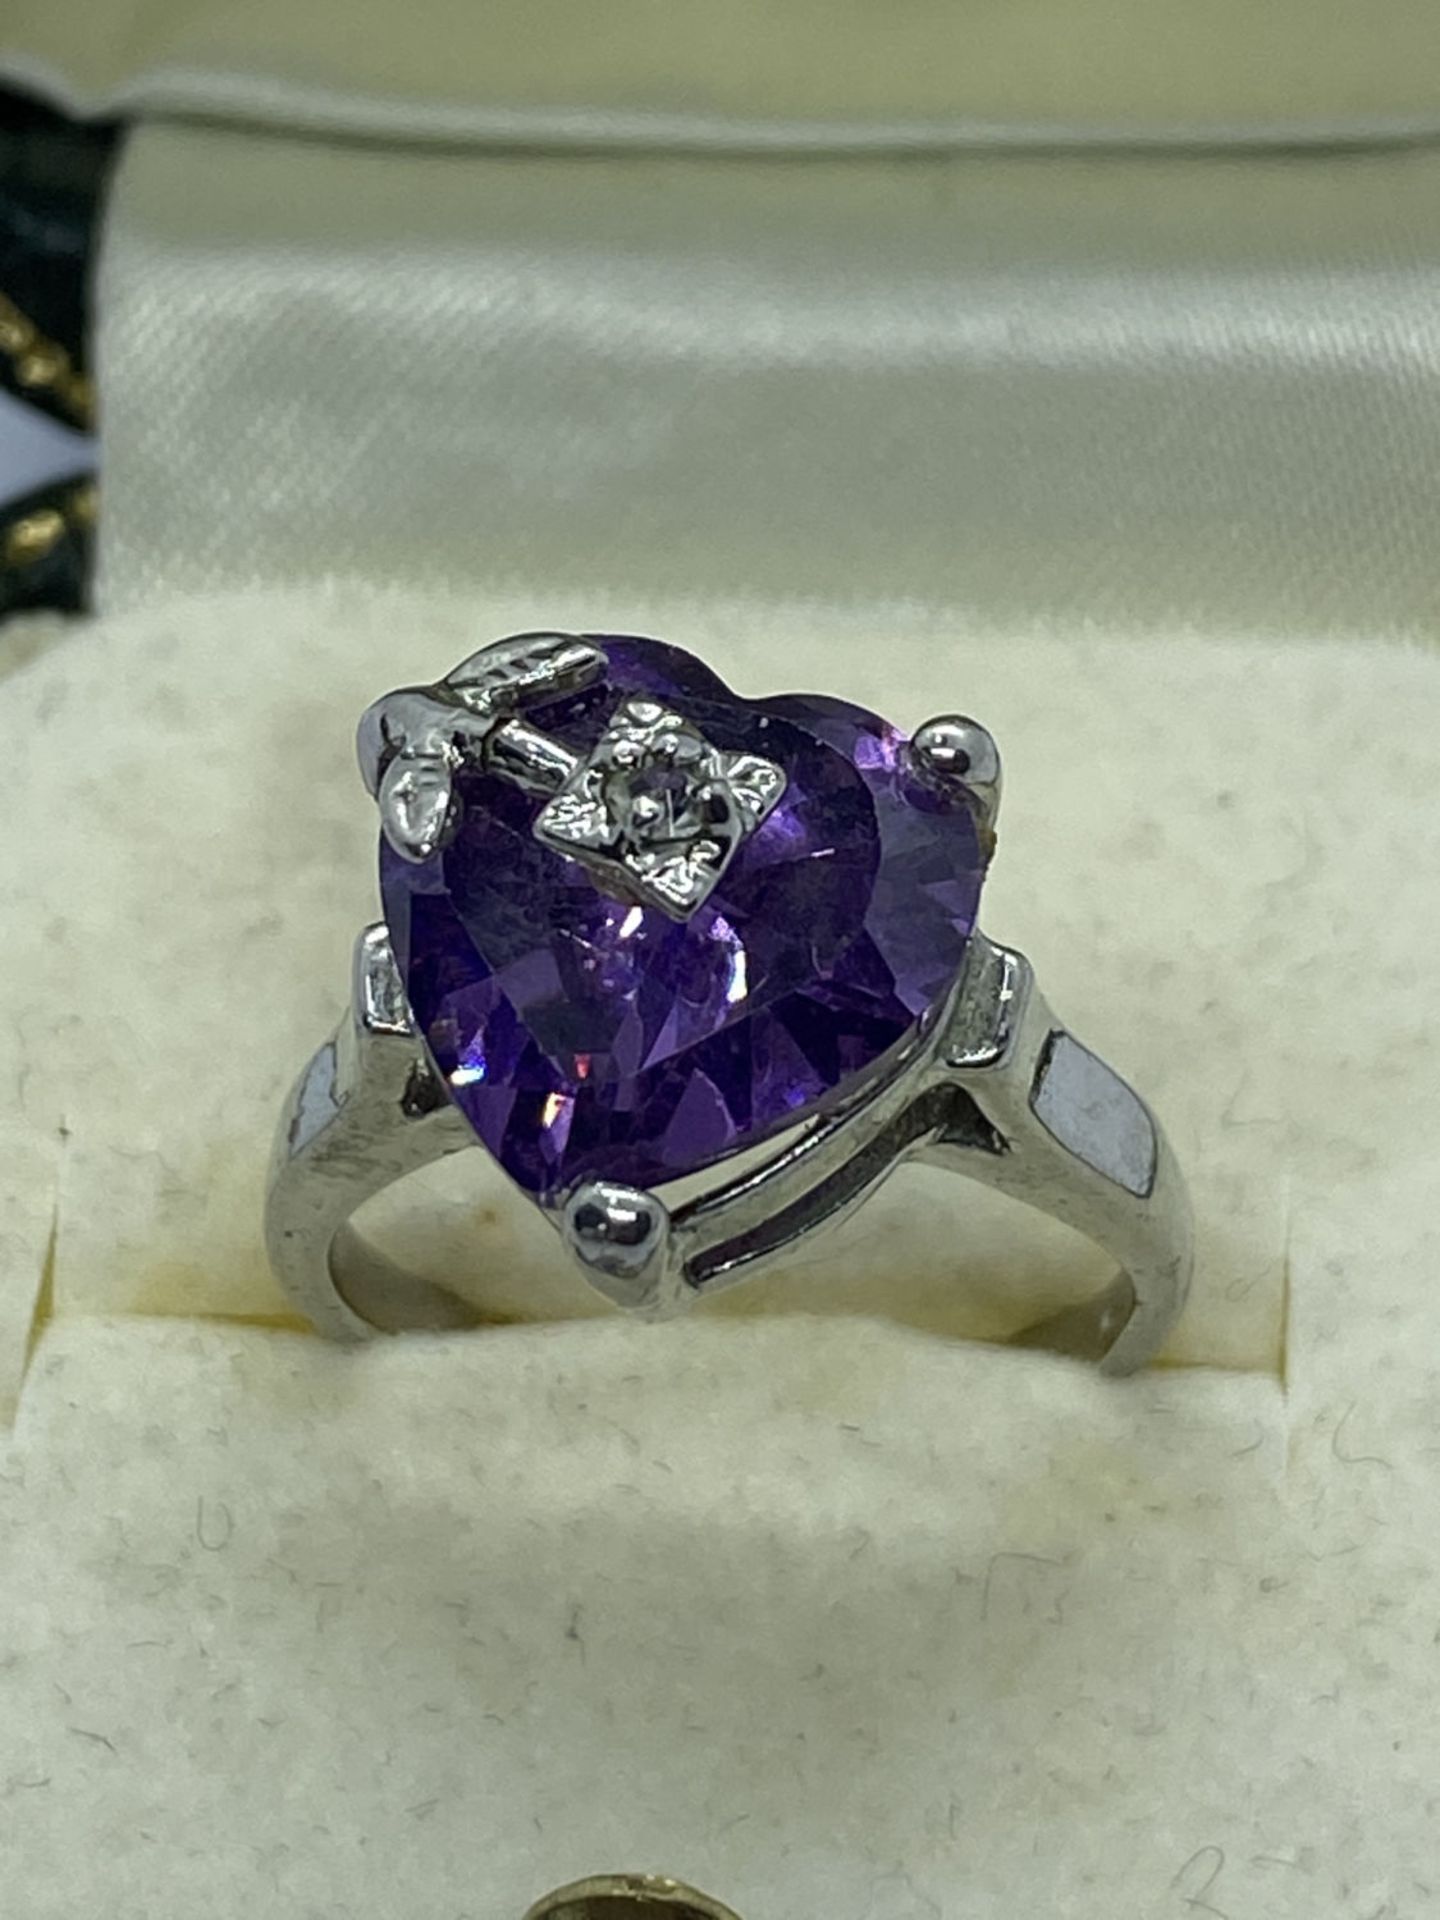 PRETTY AMETHYST RING SET IN SILVER METAL APPROX. RING SIZE N 1/2 - Image 2 of 2